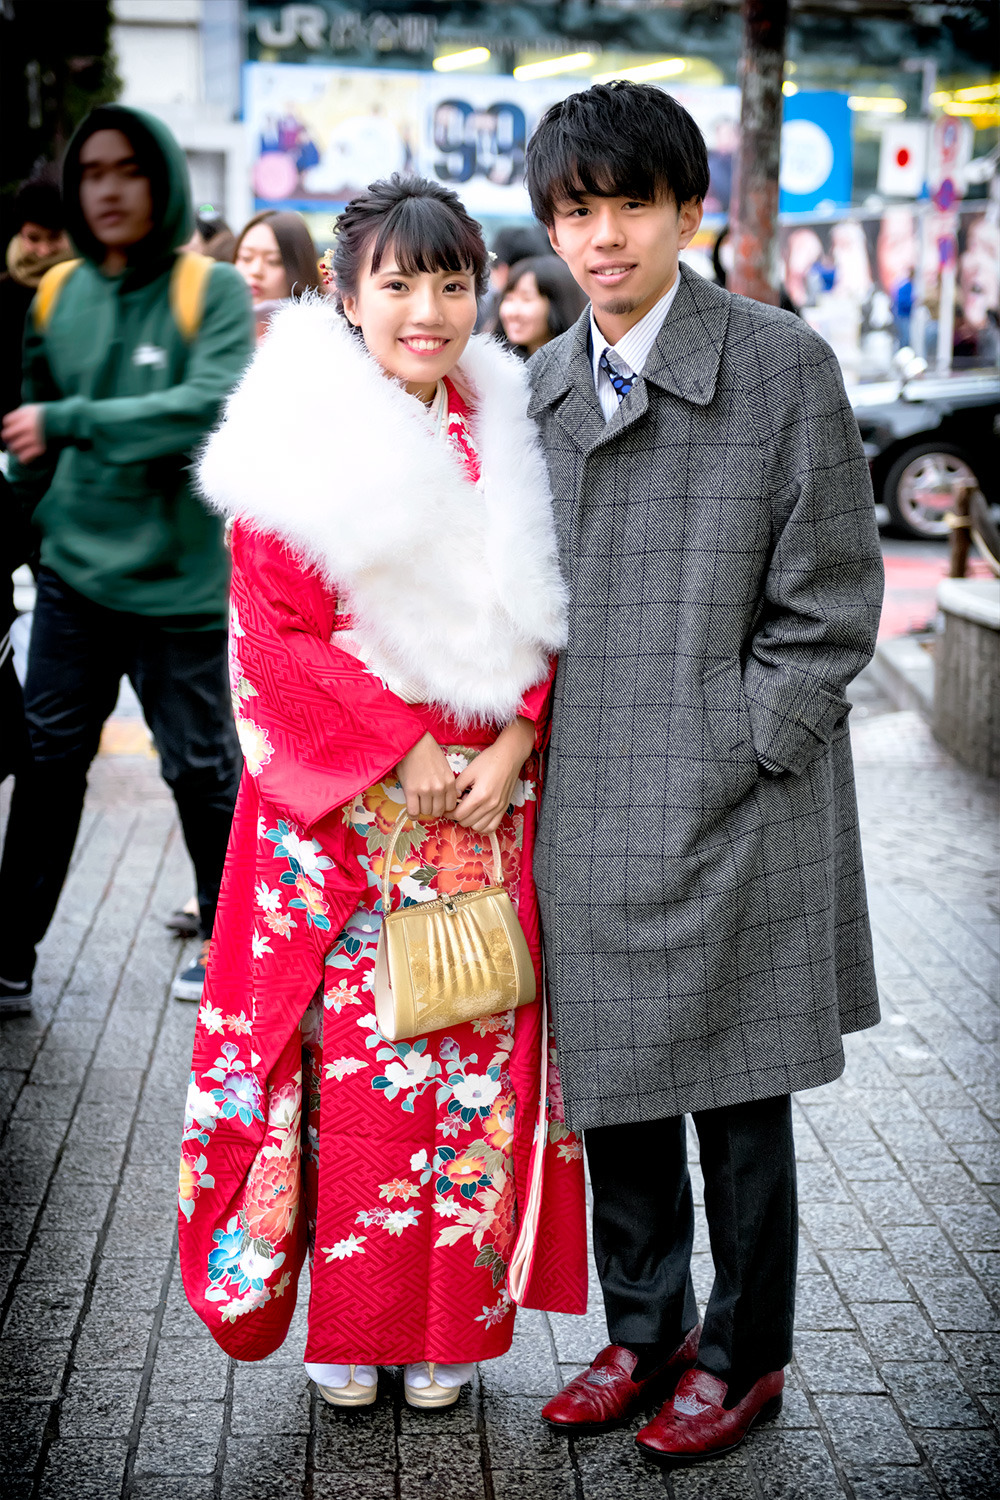 tokyo-fashion: Coming of Age Day in Japan 2018 Posted 50+ pictures of traditional